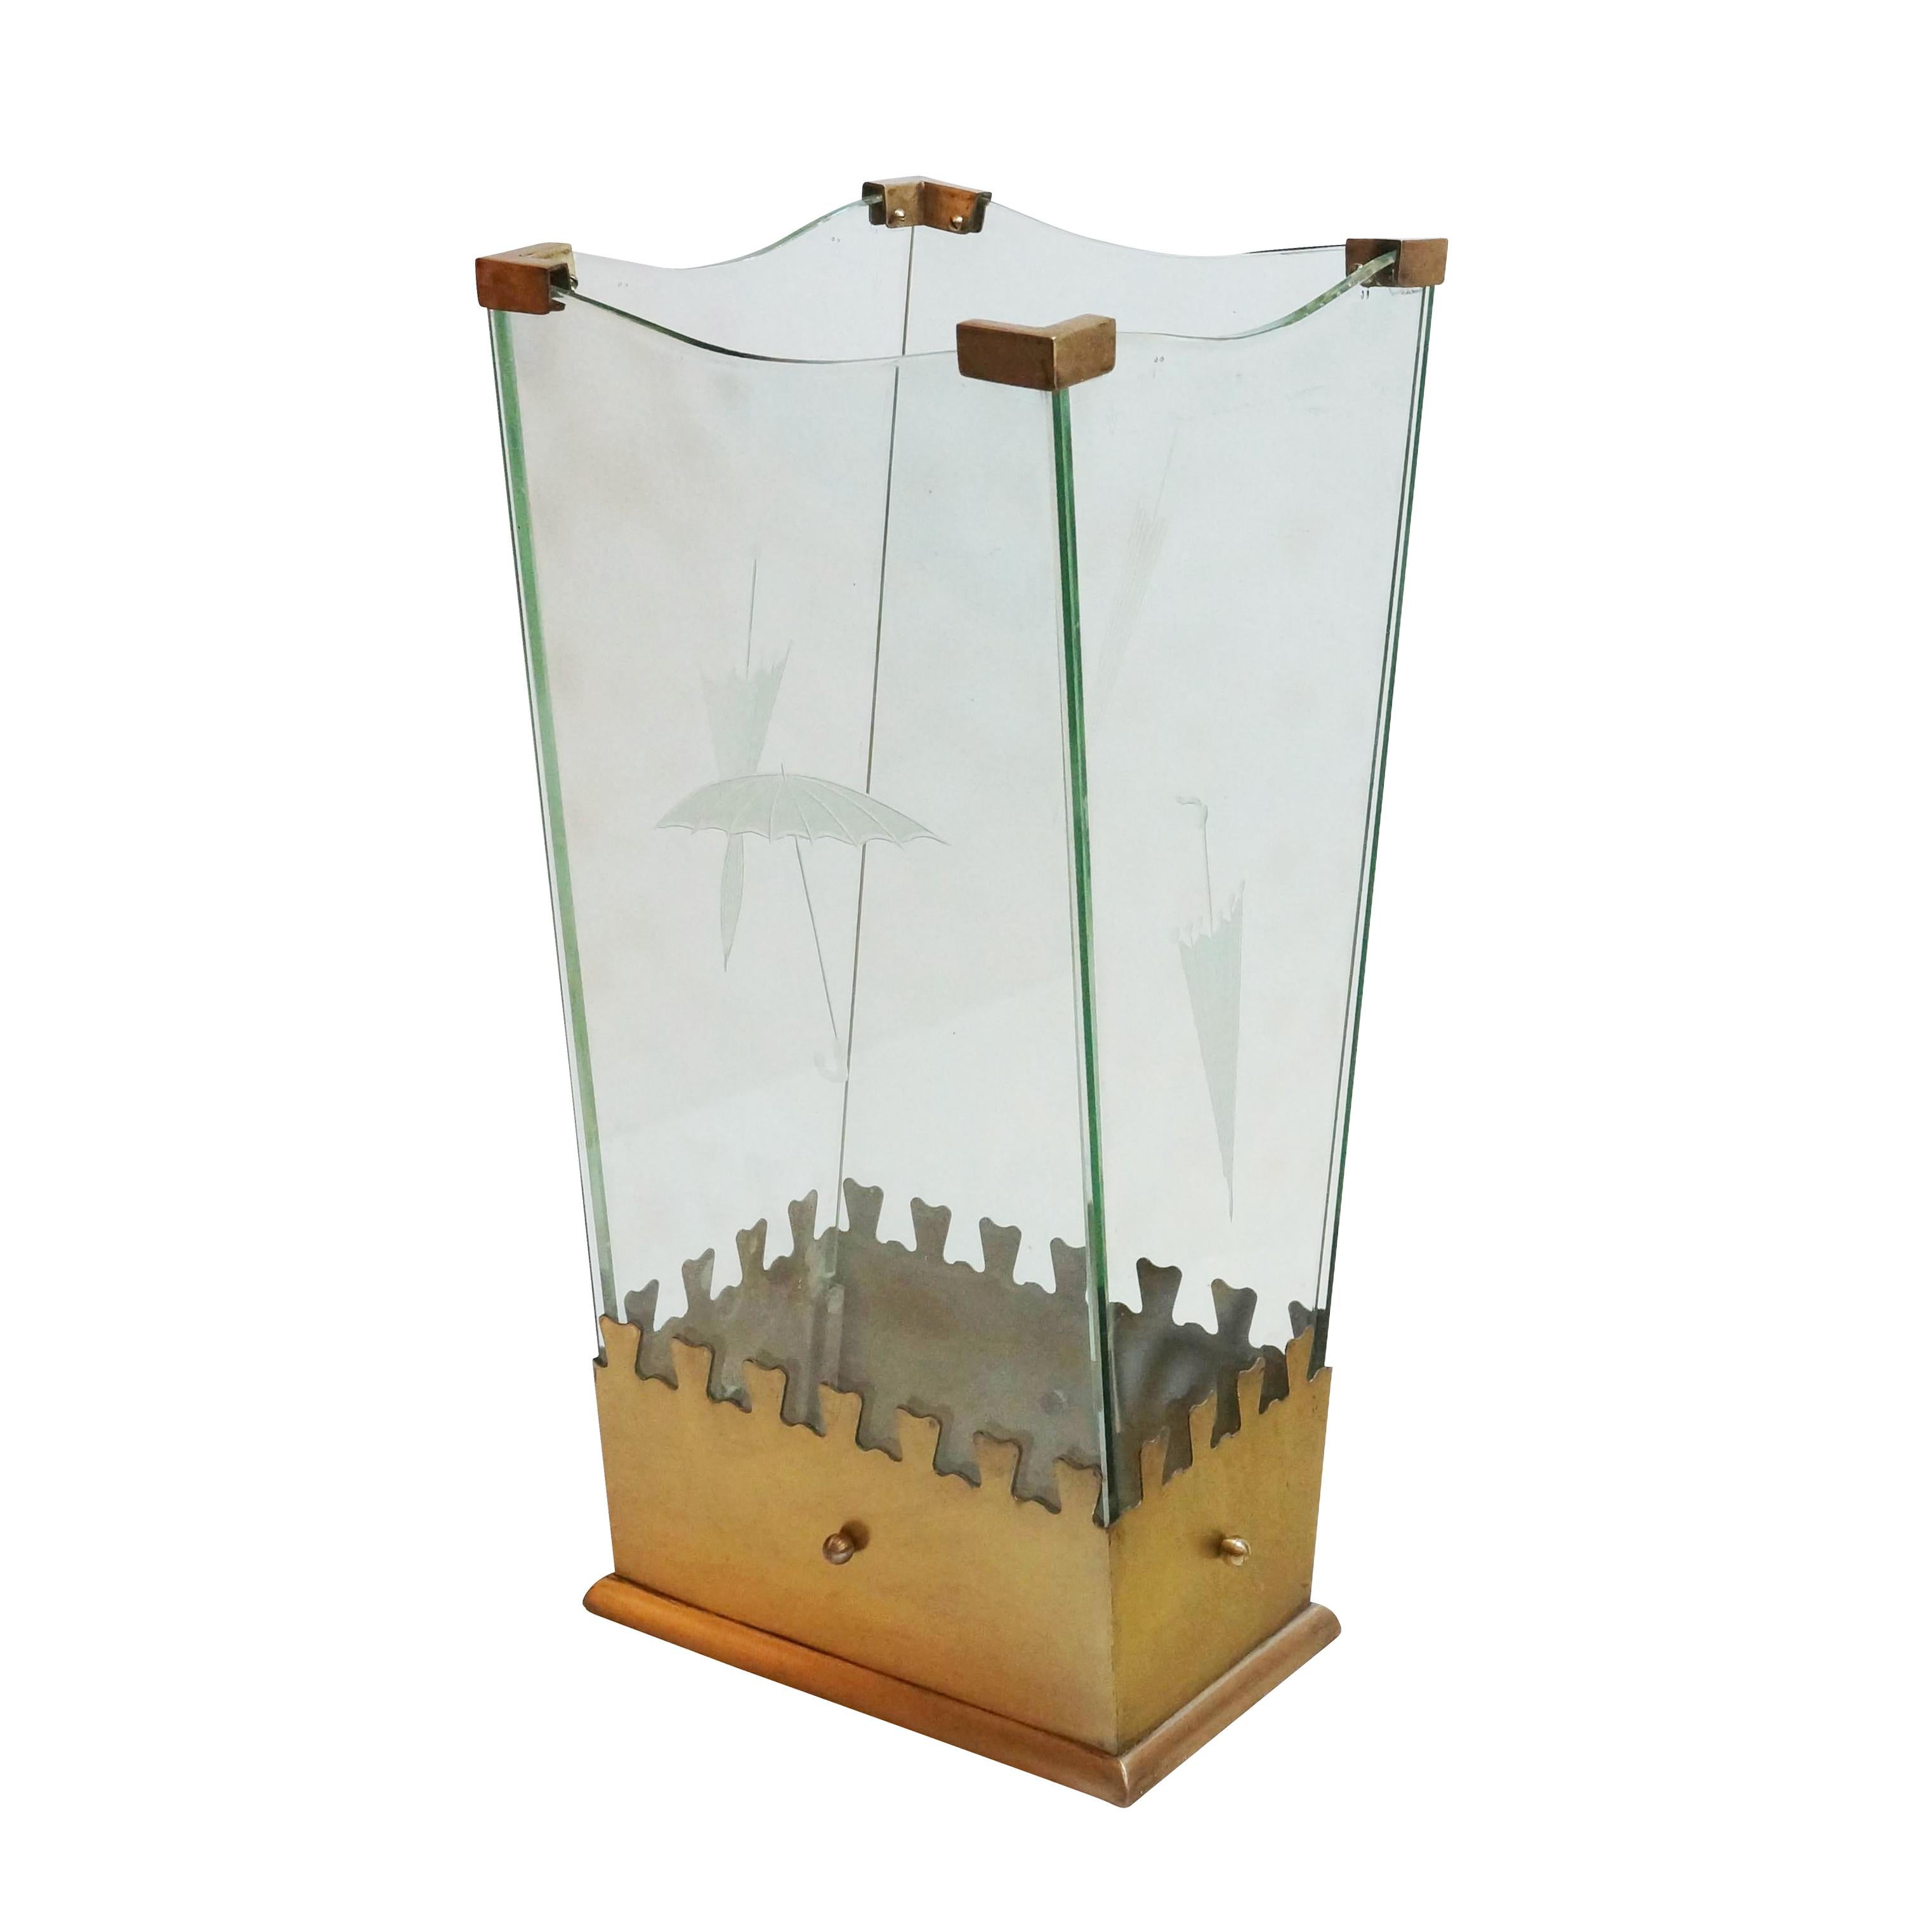 Playful glass and brass umbrella stand by crystal Art. Each of the four glass pieces has an etched image of an umbrella. The base is lacquered gold  while the hinges at the corners are brass.

Condition: Excellent vintage condition, minor wear